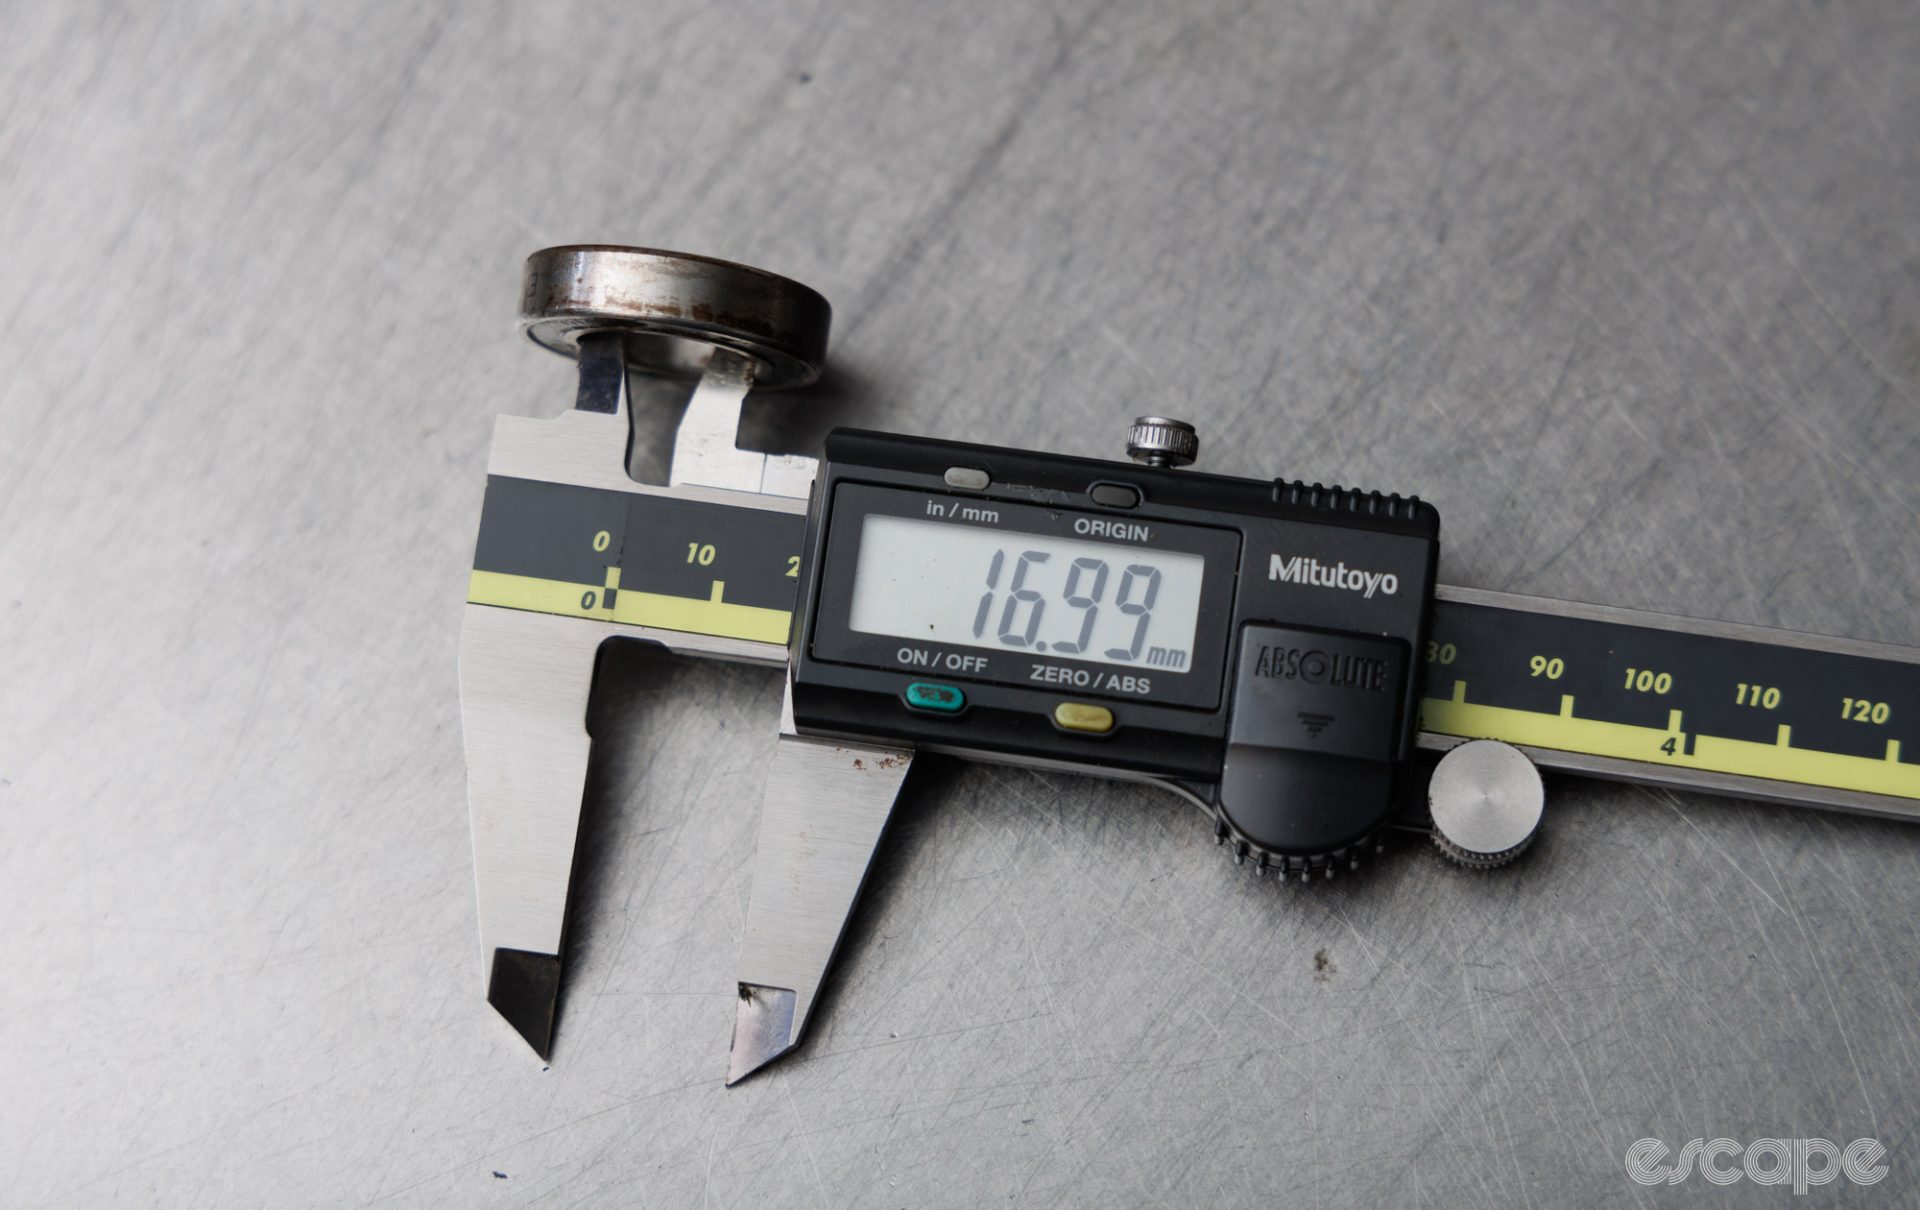 The inner diameter of a cartridge bearing is measured with digital calipers. The calipers read 16.99 mm. 